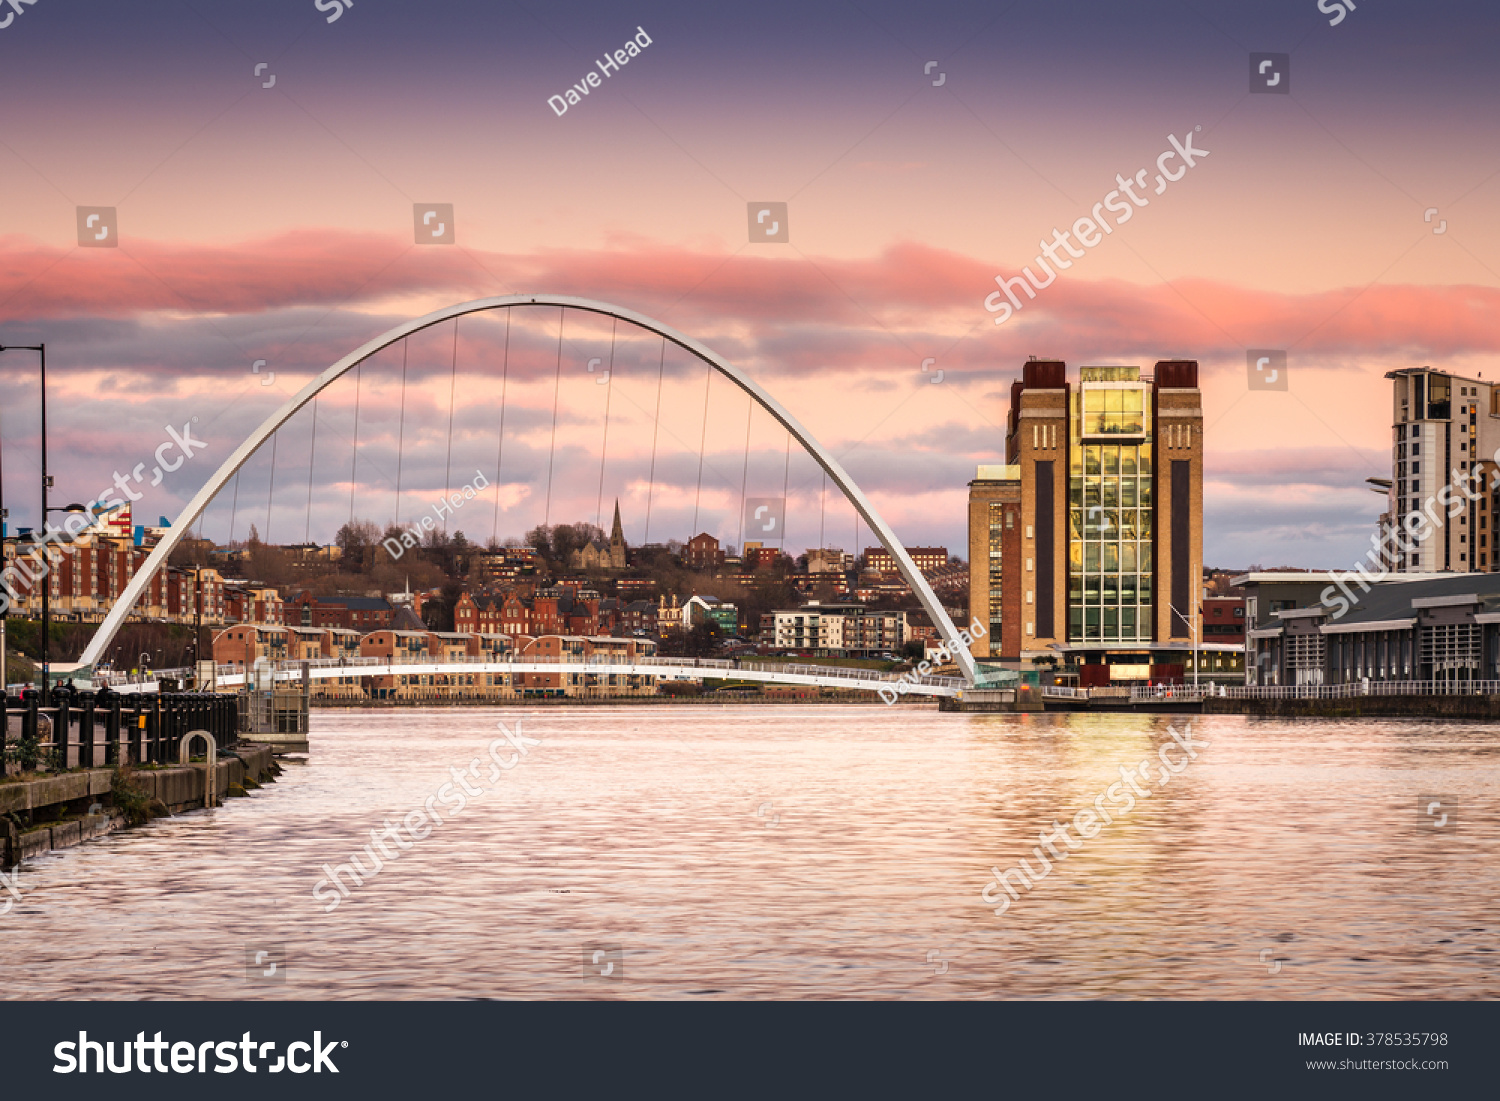 Millennium Bridge at sunset / The Iconic Millennium Bridge crosses the River Tyne joining the Quaysides of Newcastle and Gateshead for cycles and pedestrians #378535798